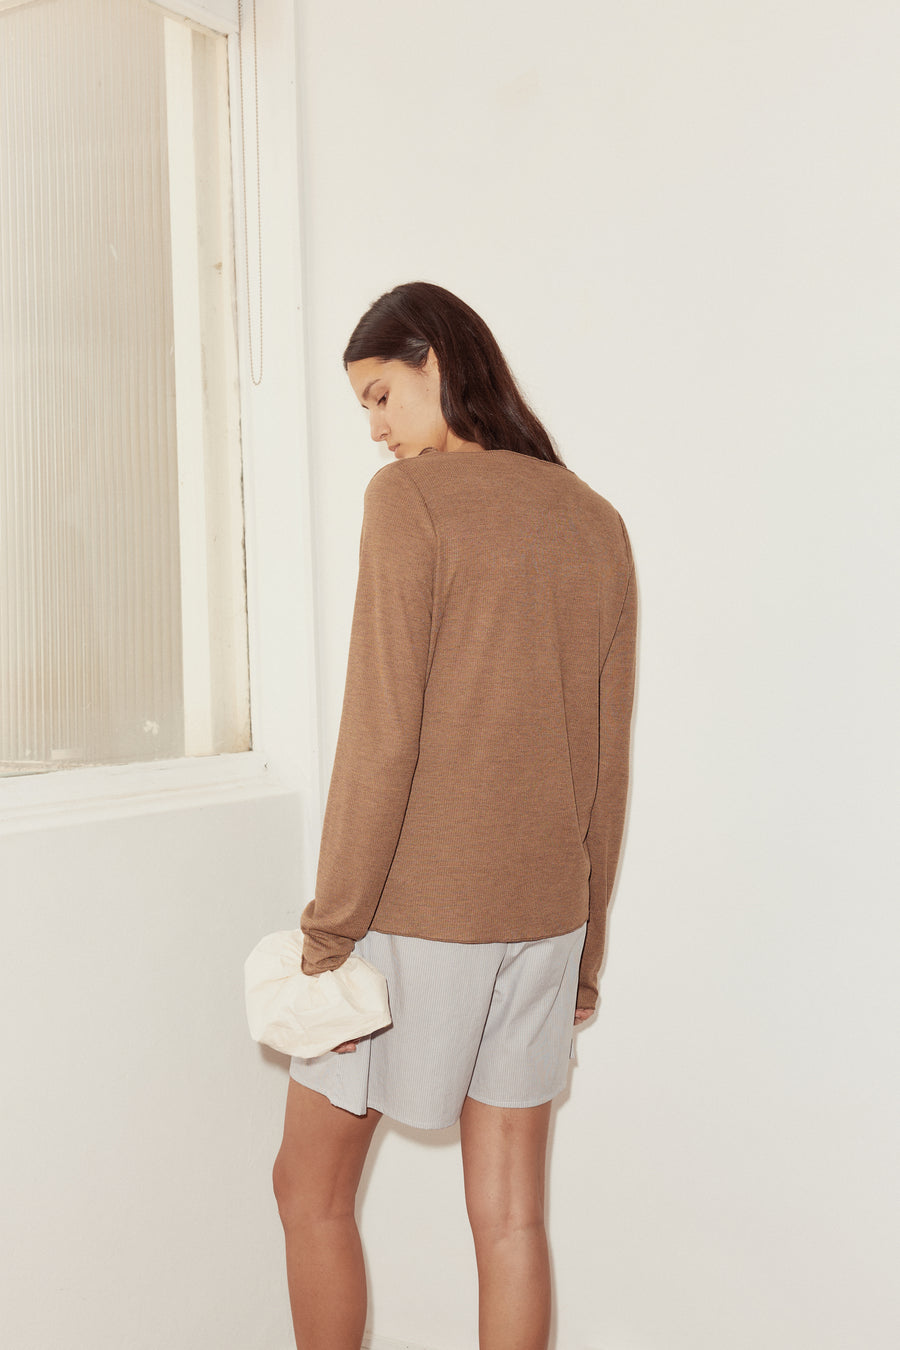 back shot of model wearing mid short in dream stripe and open long sleeve top in coffee. Short features relaxed fit and mid length.